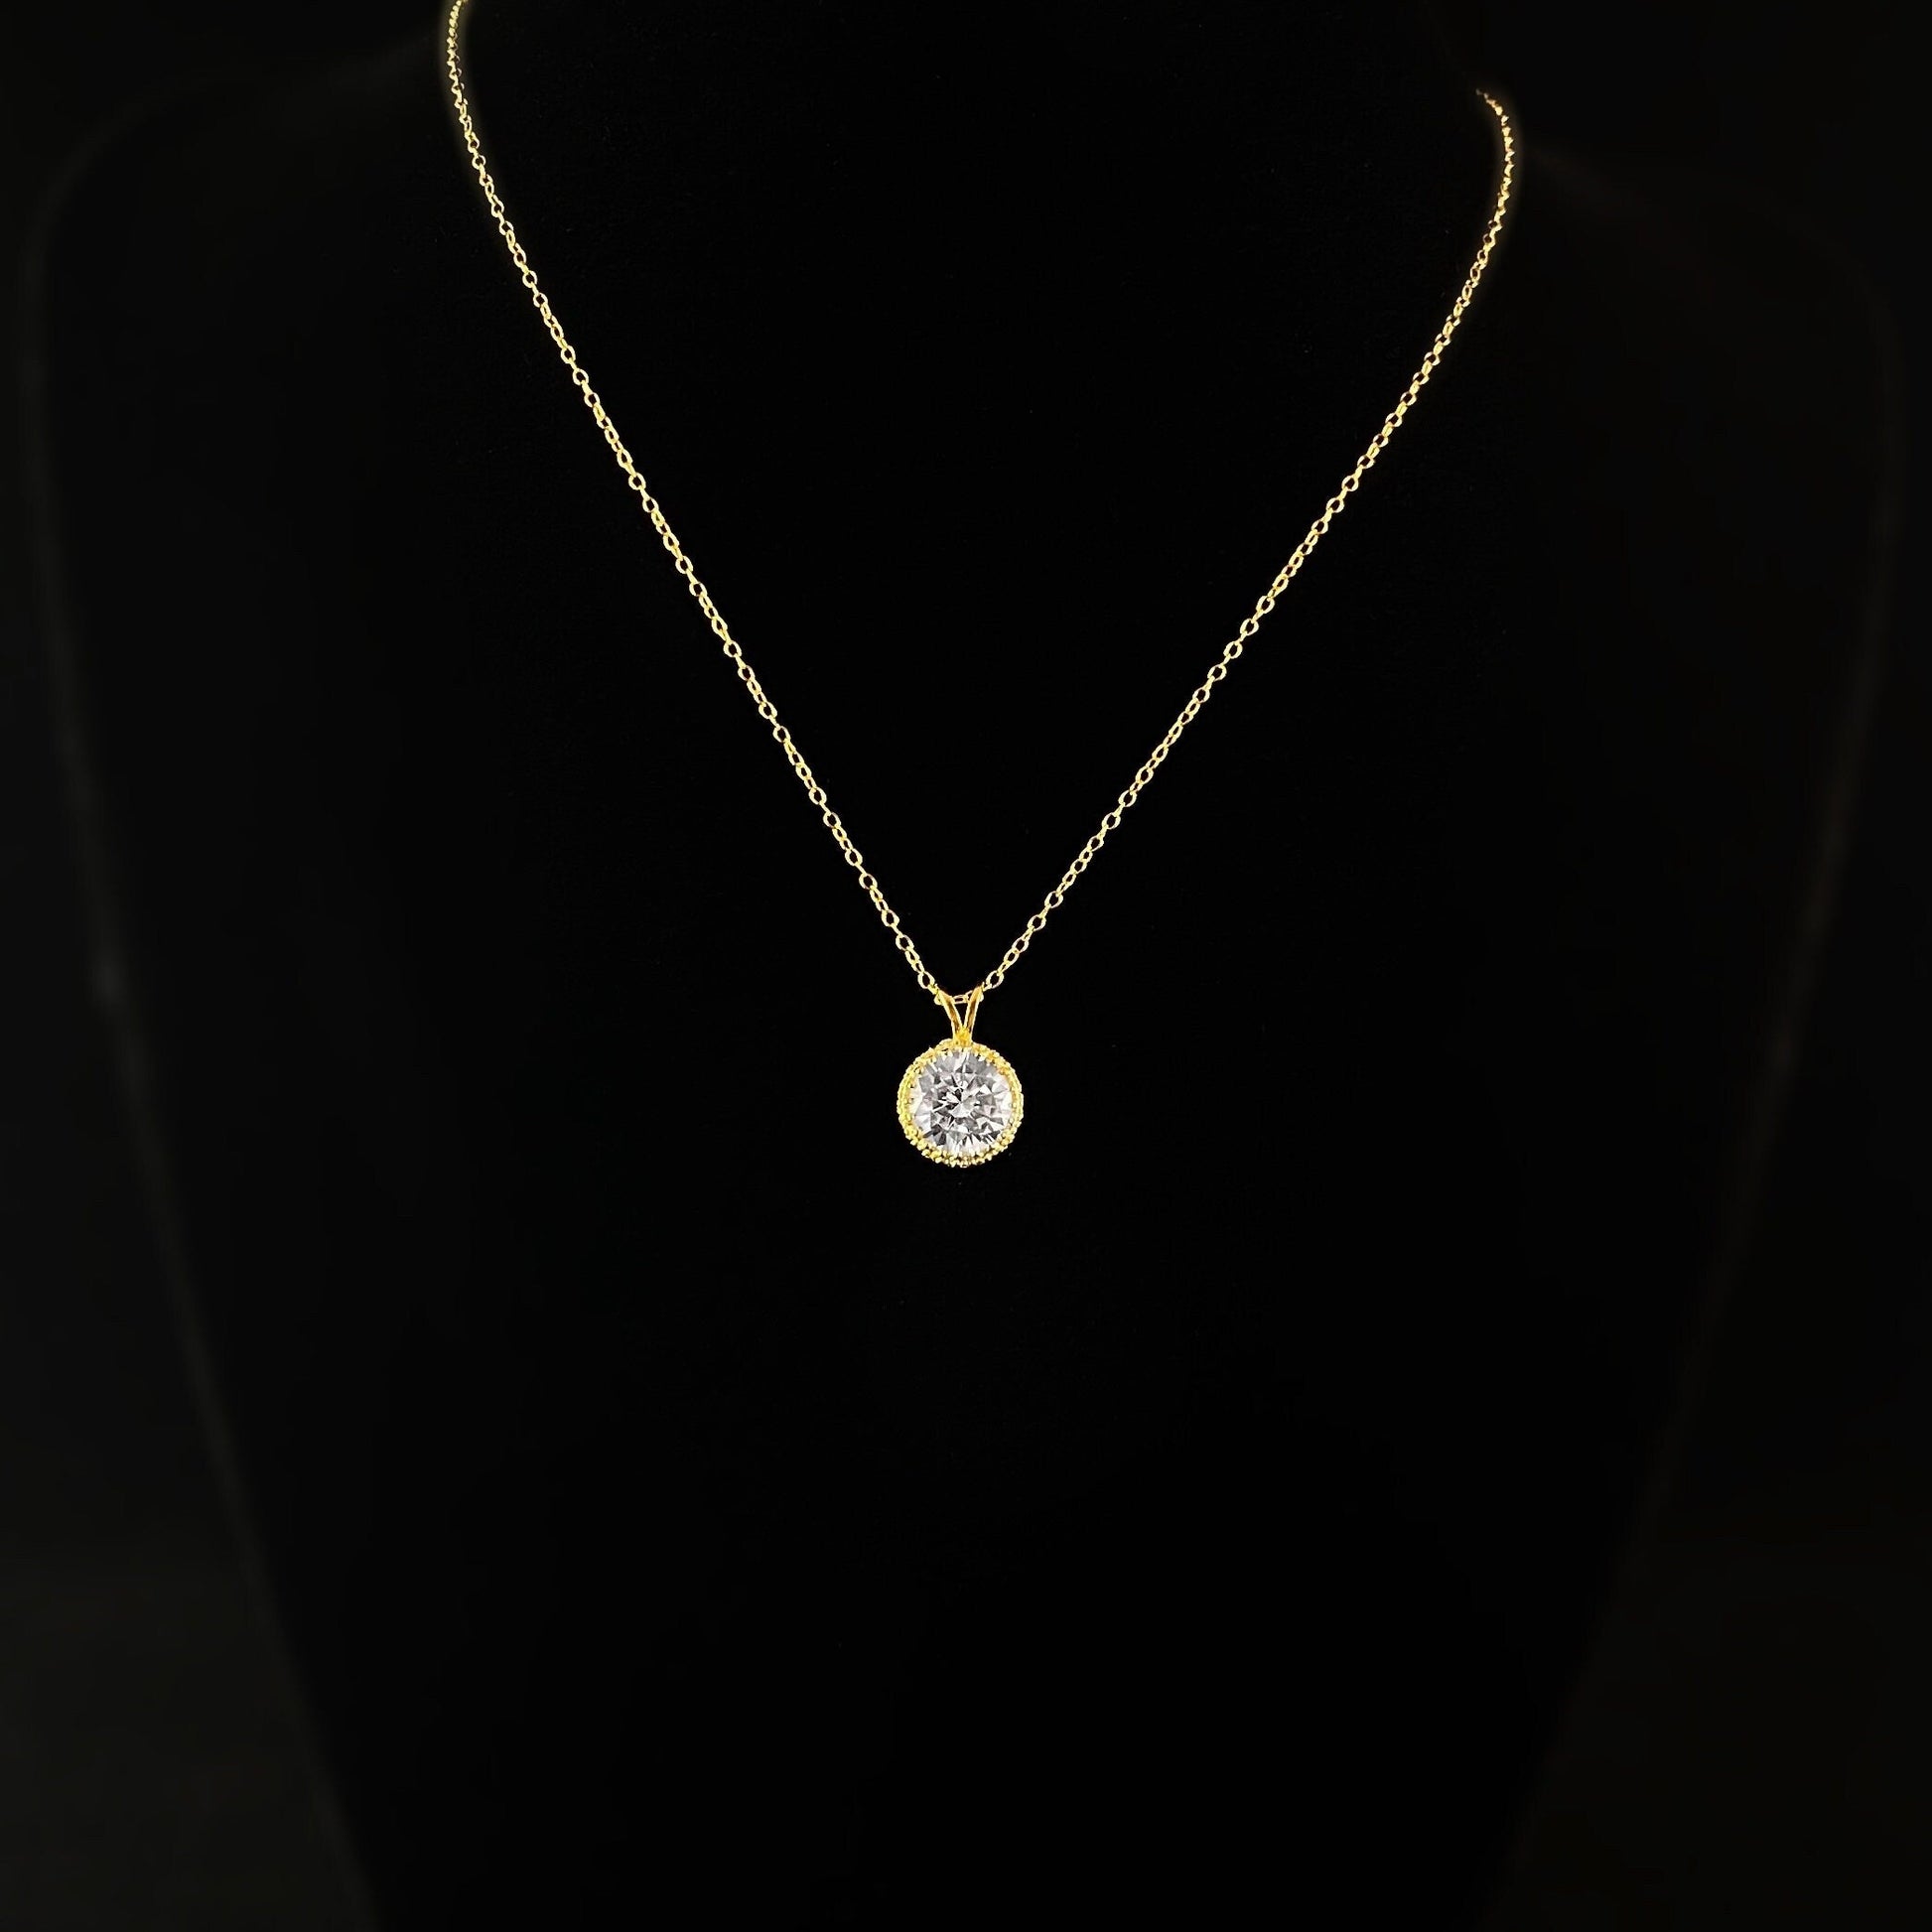 Elegant Gold Necklace with Round Clear Crystal - Genevive